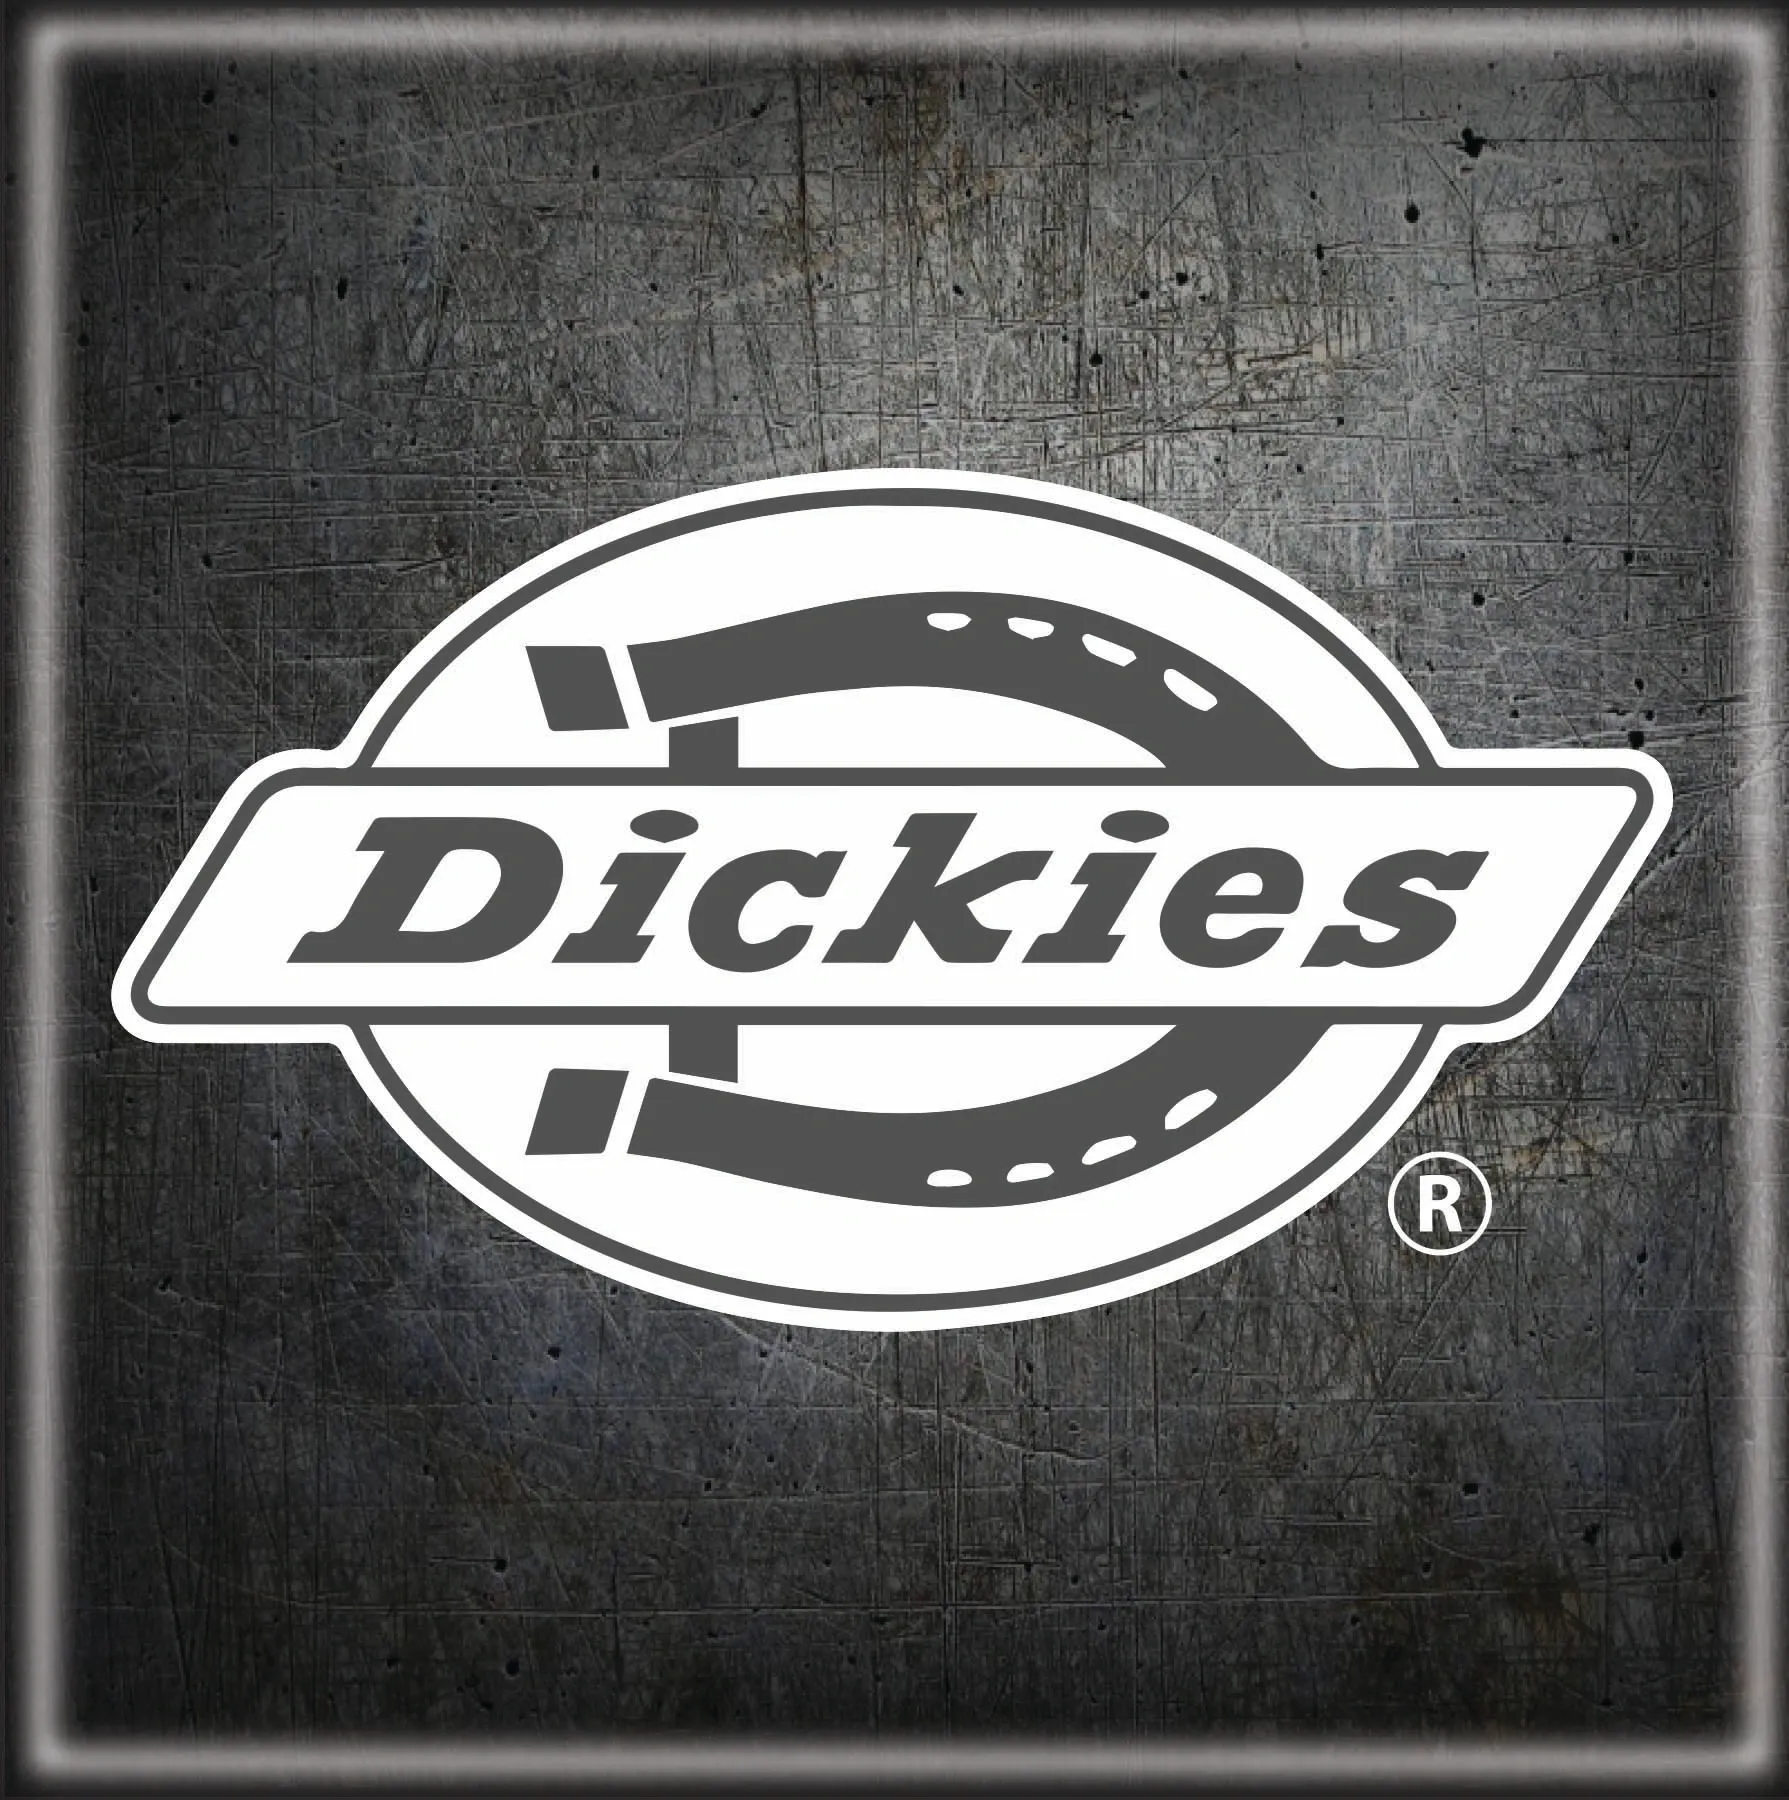 A picture of the dickies logo.